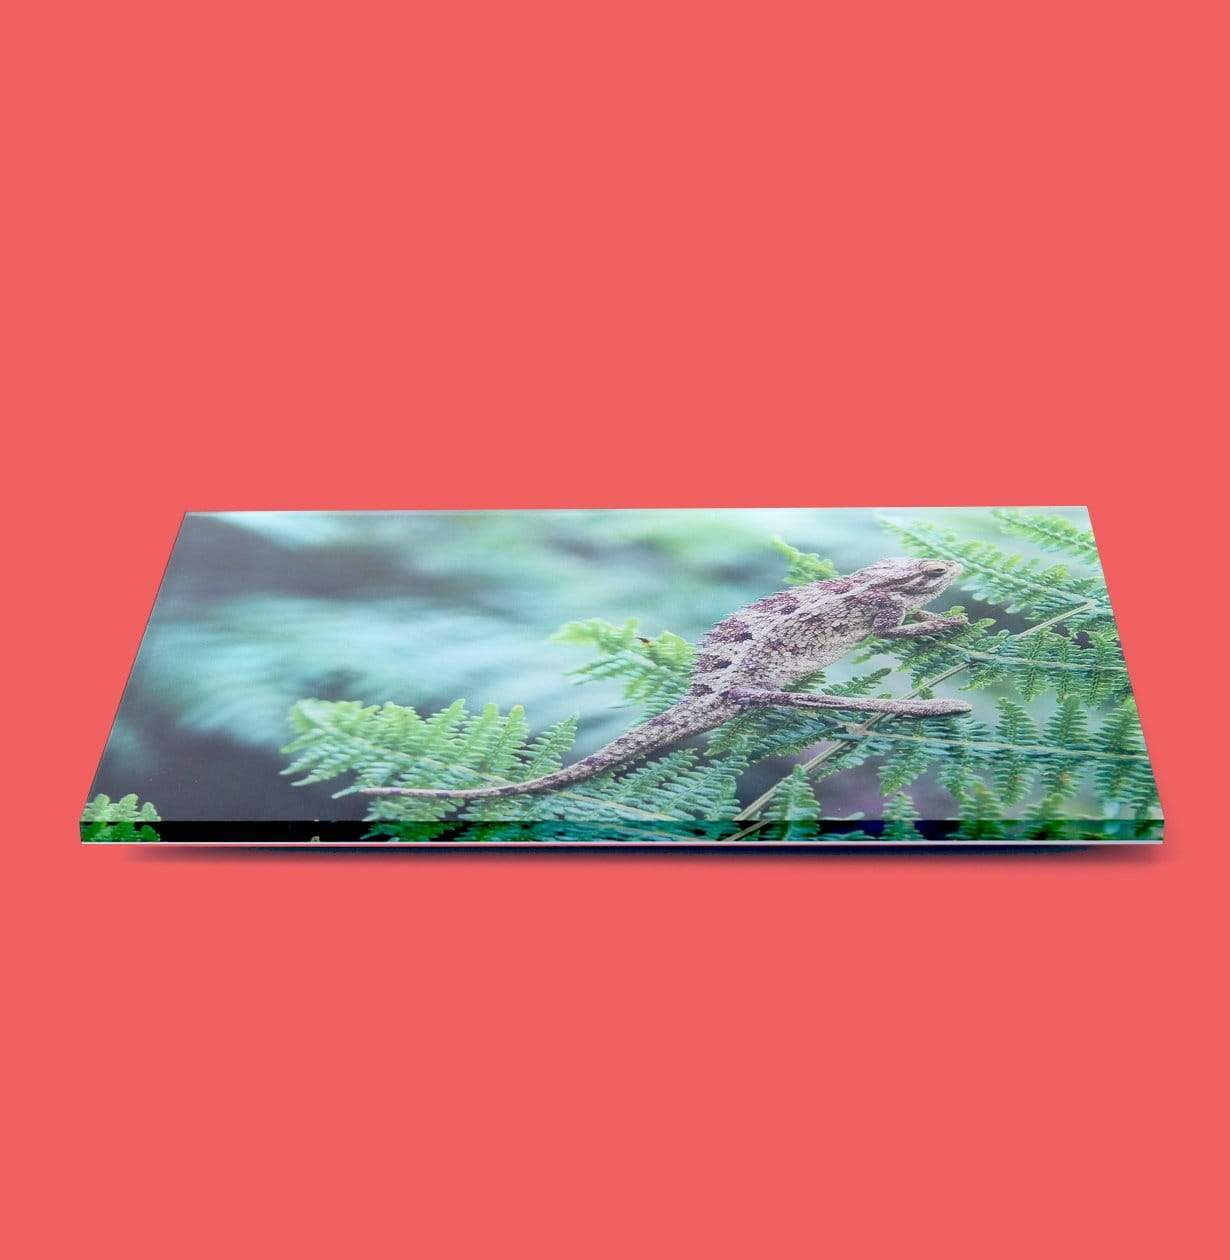 Side-view of an Acrylic Print without a Hanging System Installed